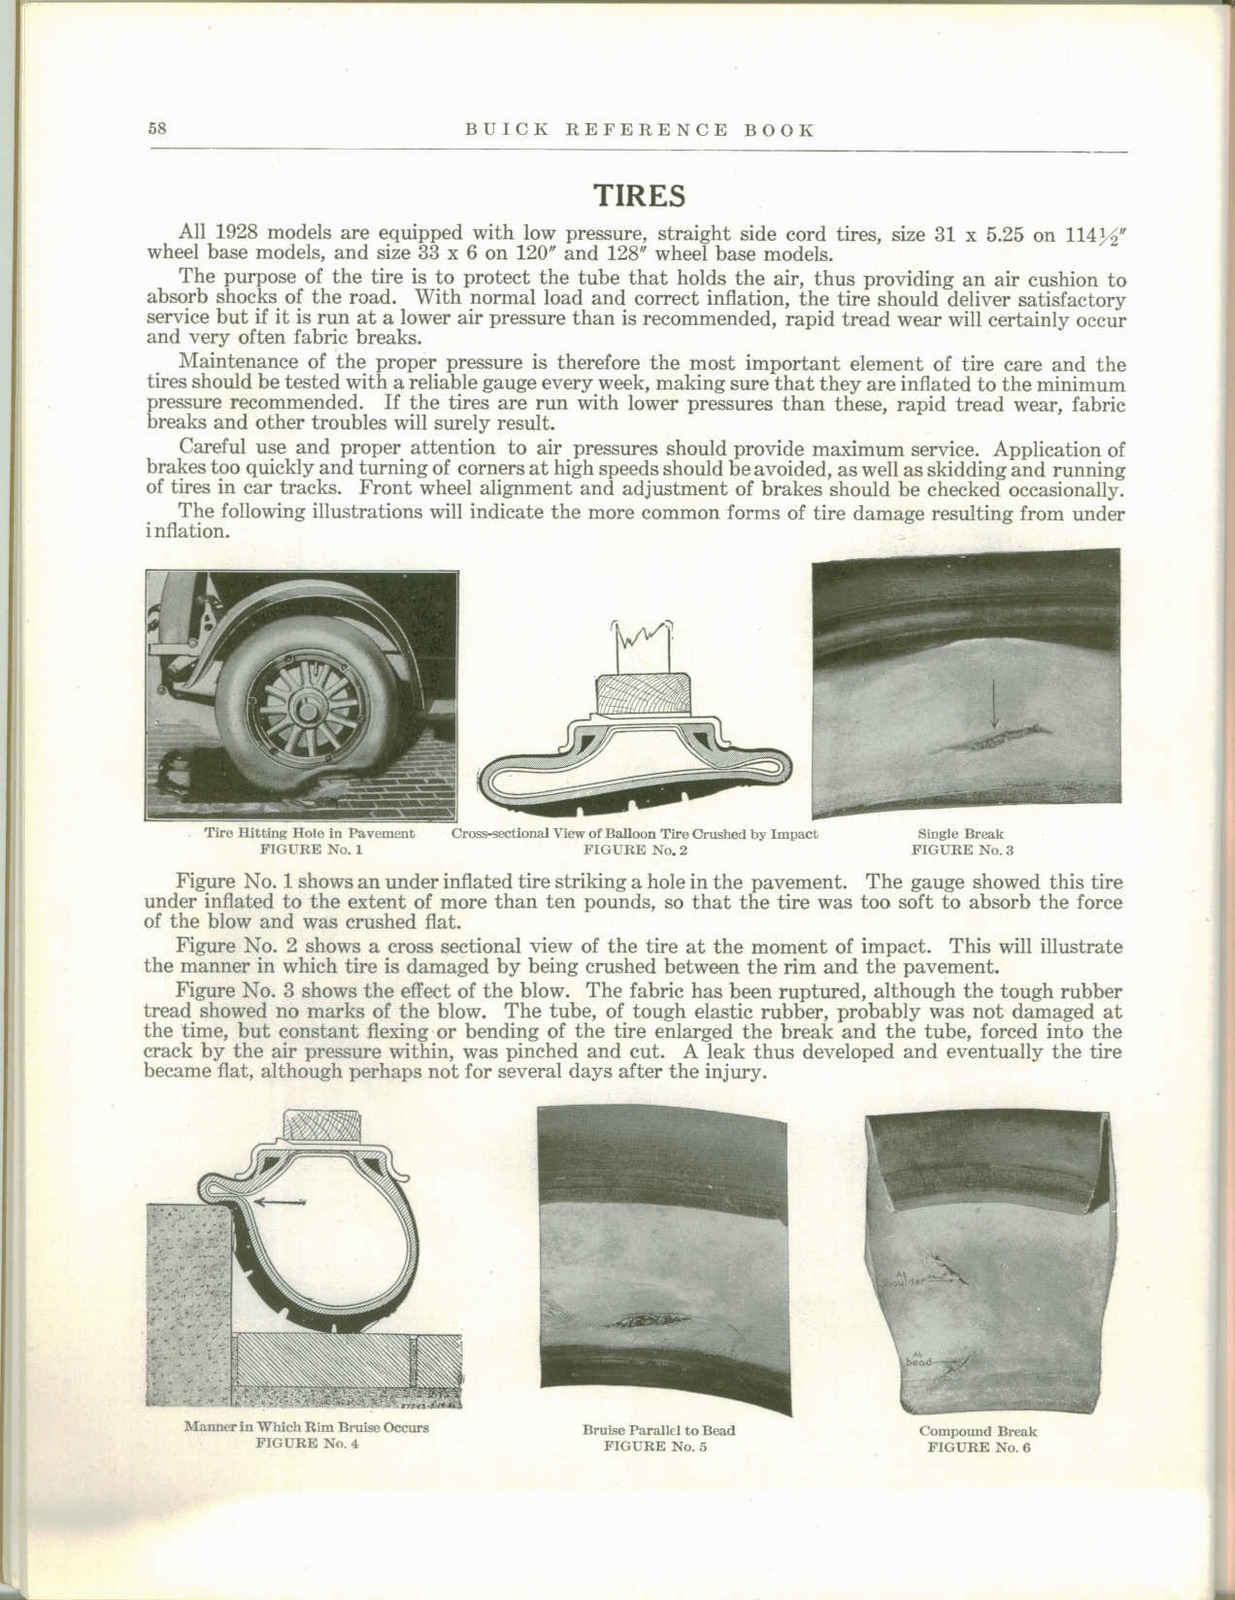 n_1928 Buick Reference Book-58.jpg